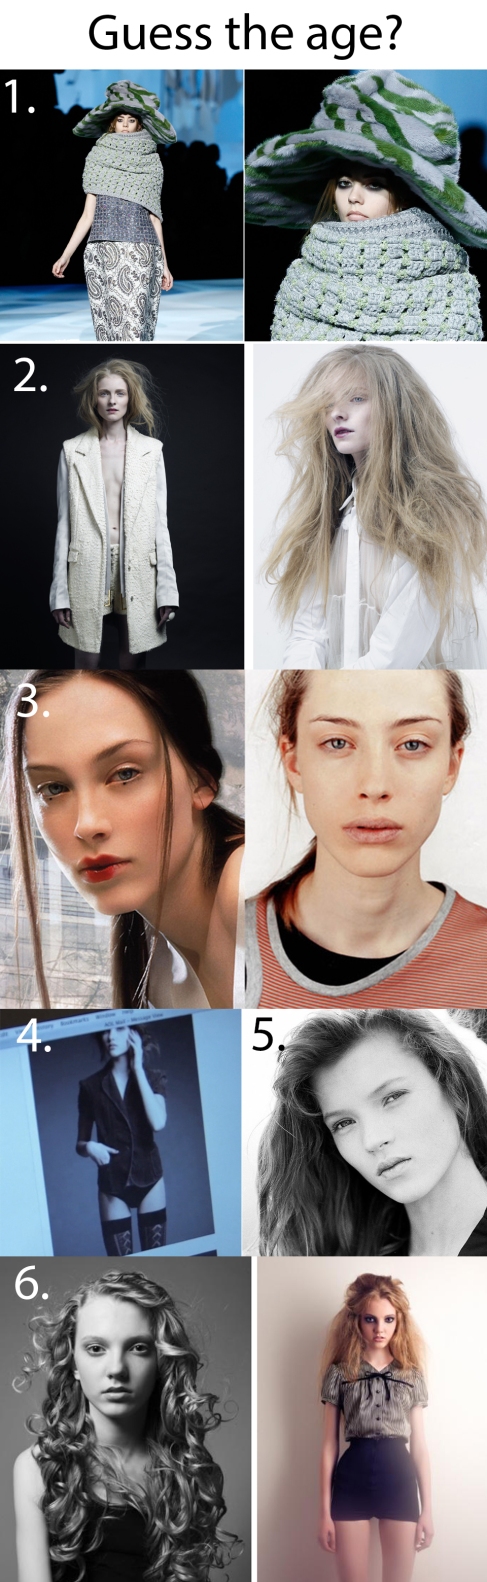 Guess the age of the models